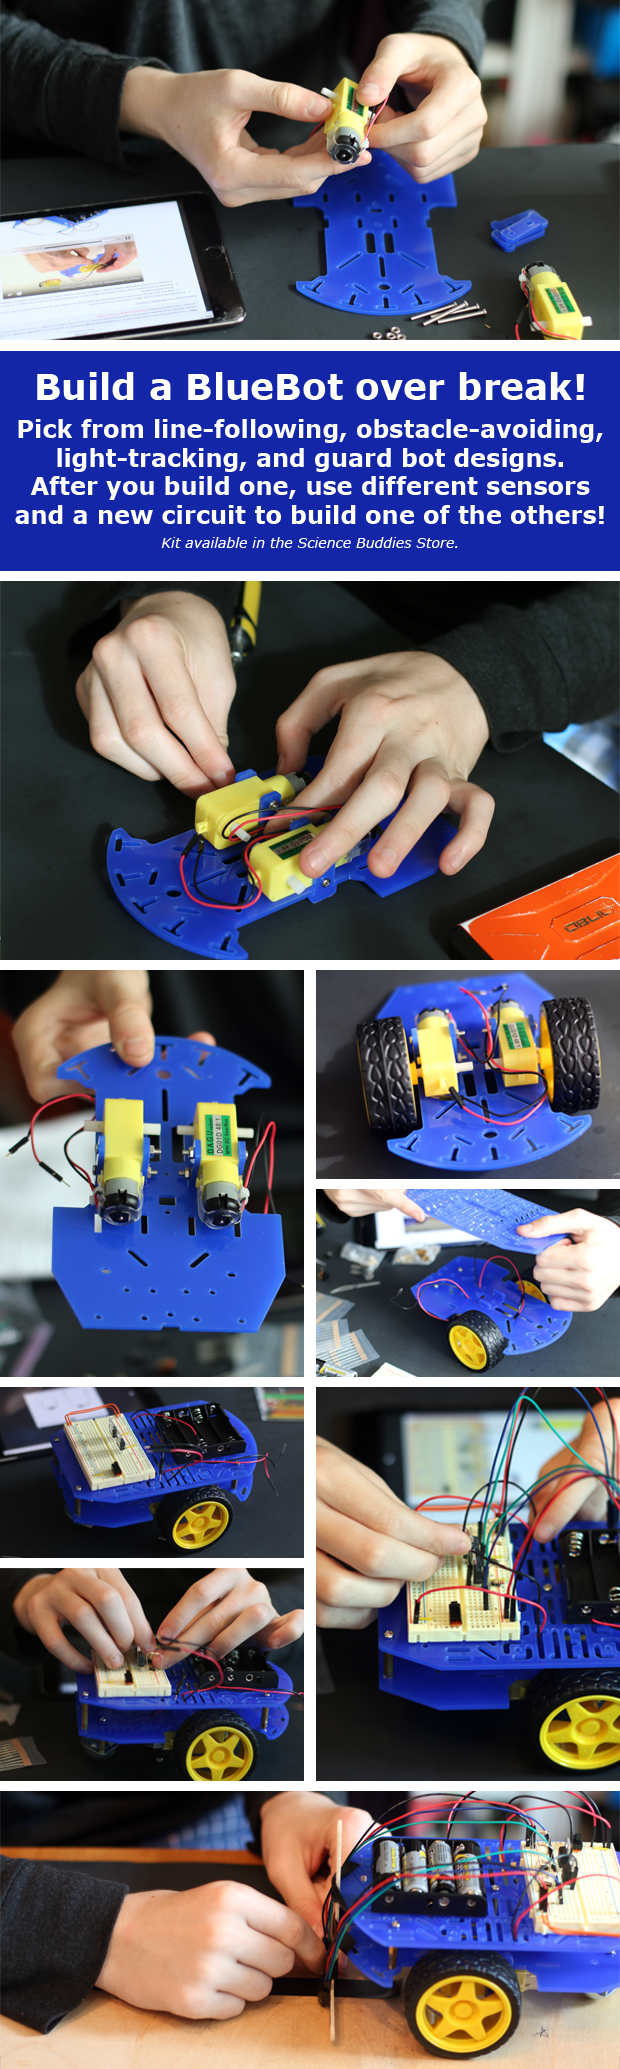 Build a BlueBot Over Break with the BlueBot: 4-in-1 Robotics Kit from the Science Buddies Store